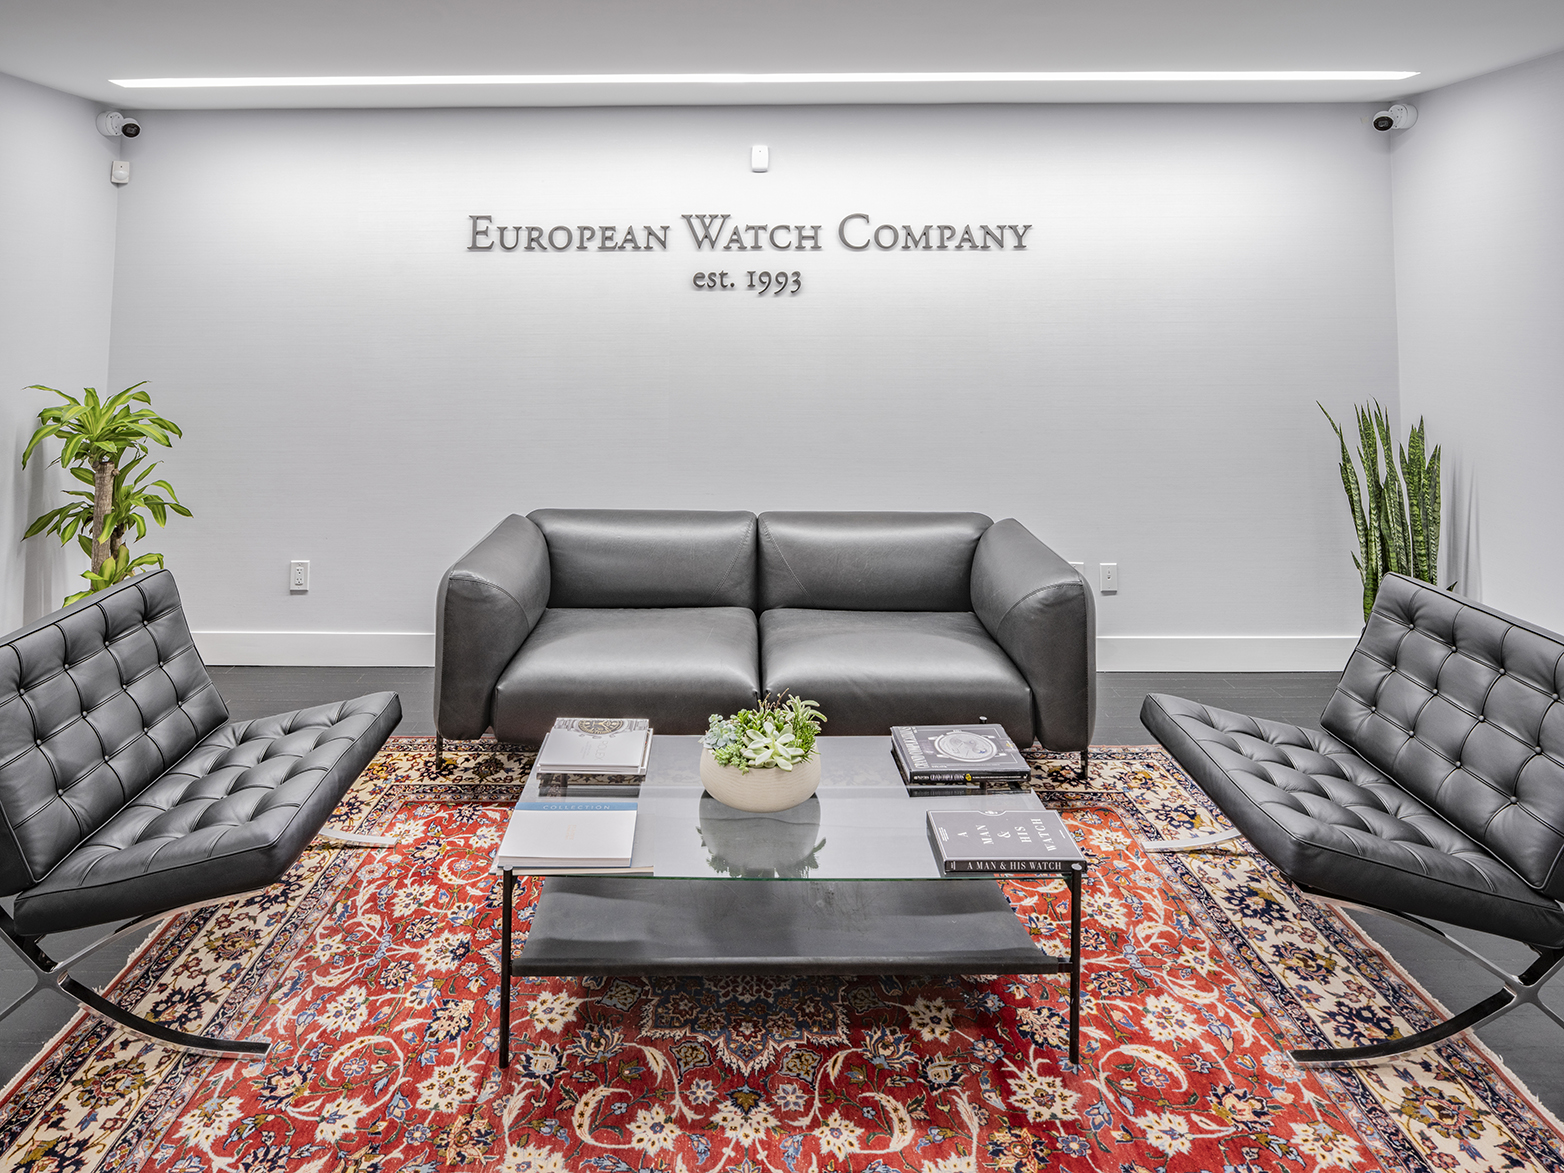 Interior of European Watch Company, lounge area, 3 love seats, oriental area rug with glass coffee table with  plants, books, with "European Watch Company est. 1993" on the wall behind center love seat, plants in the corner